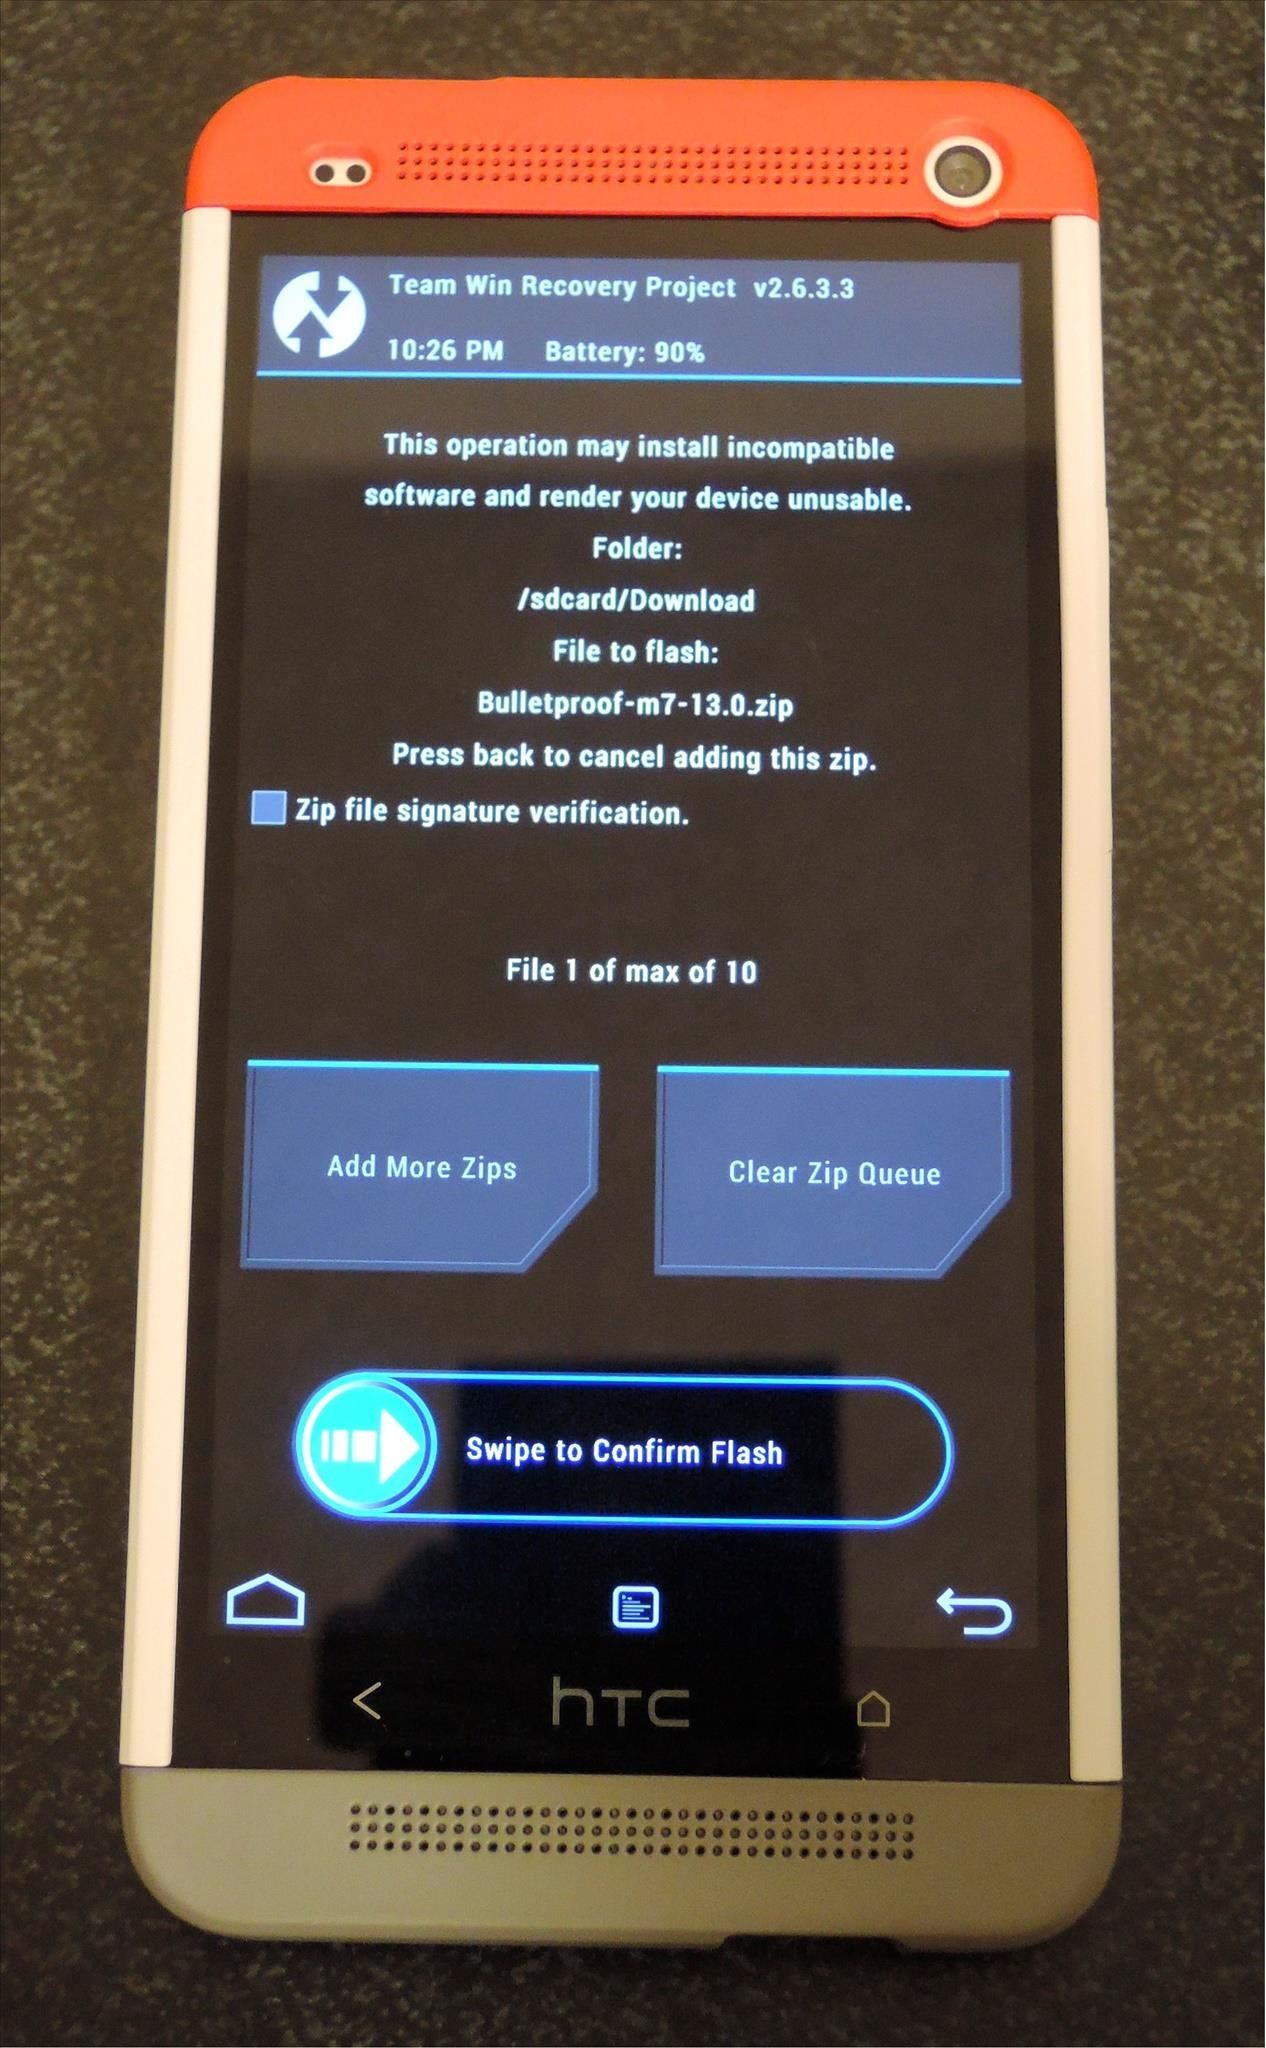 How to “KnockOn” Your HTC One (Double-Tap Screen to Wake)